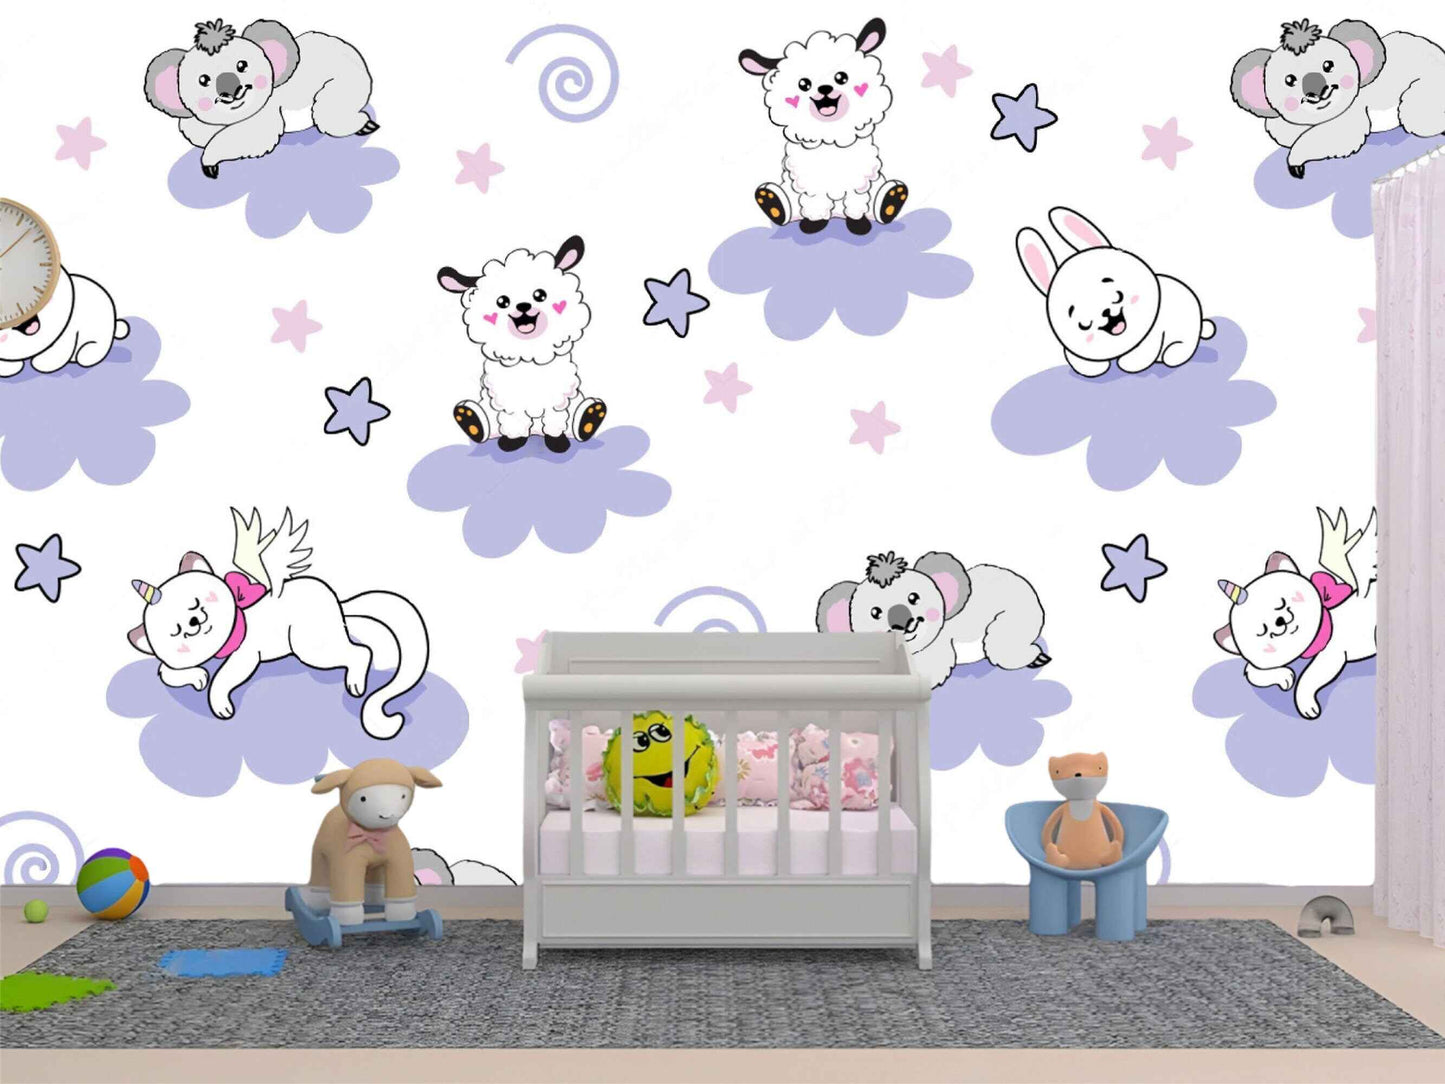 Playful nursery wallpaper designs with charming cartoon animals, creating a whimsical and joyful ambiance.